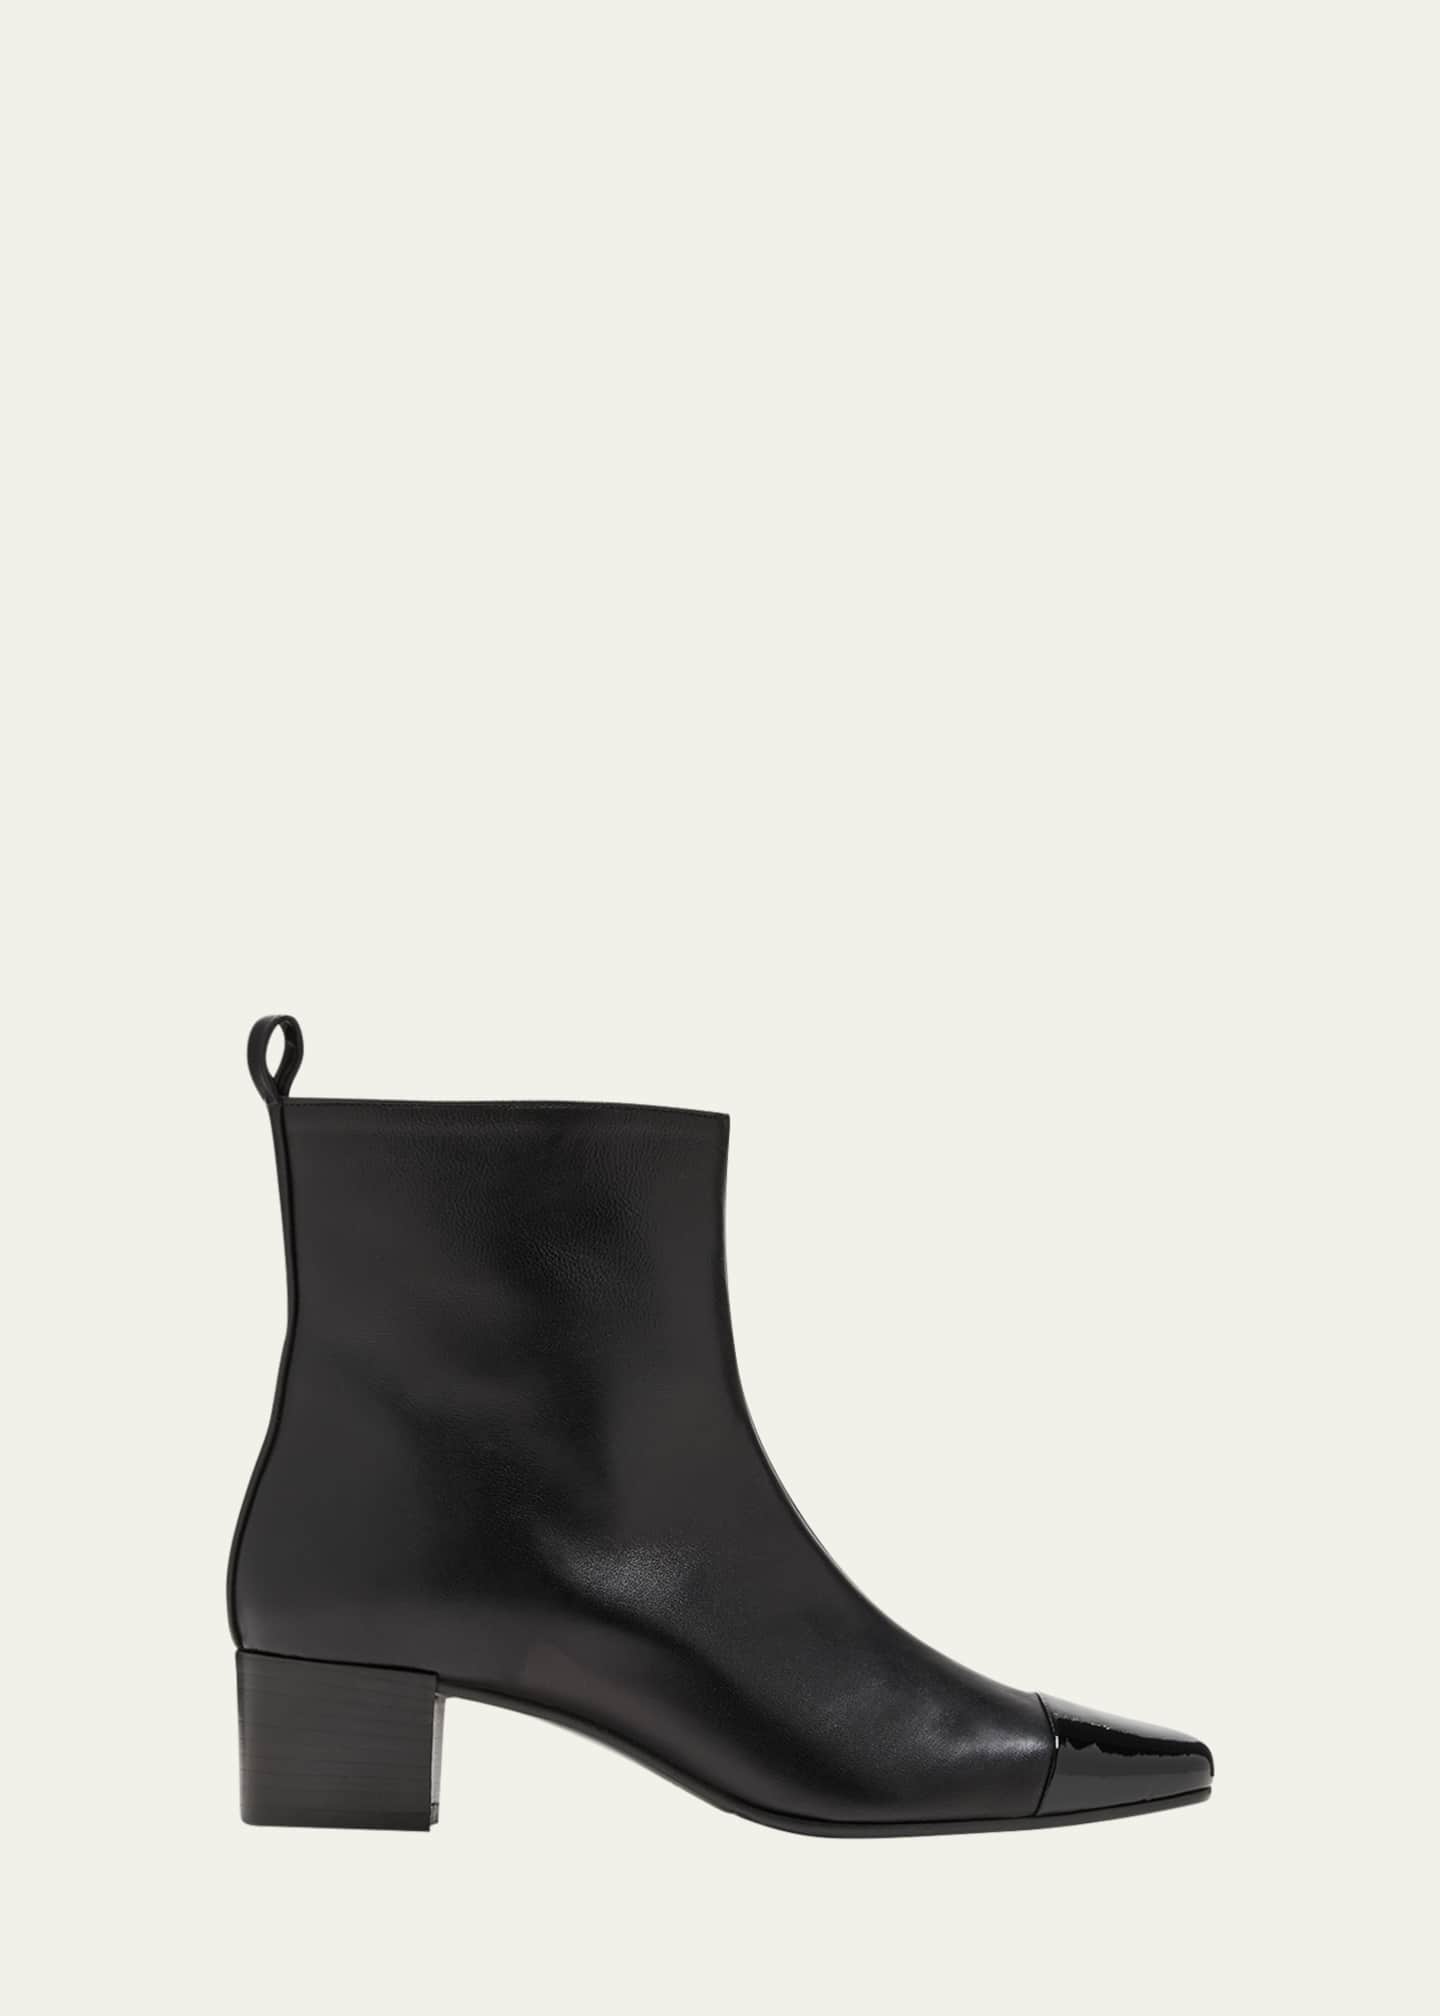 CAREL Estime Mixed Leather Ankle Boots - Bergdorf Goodman